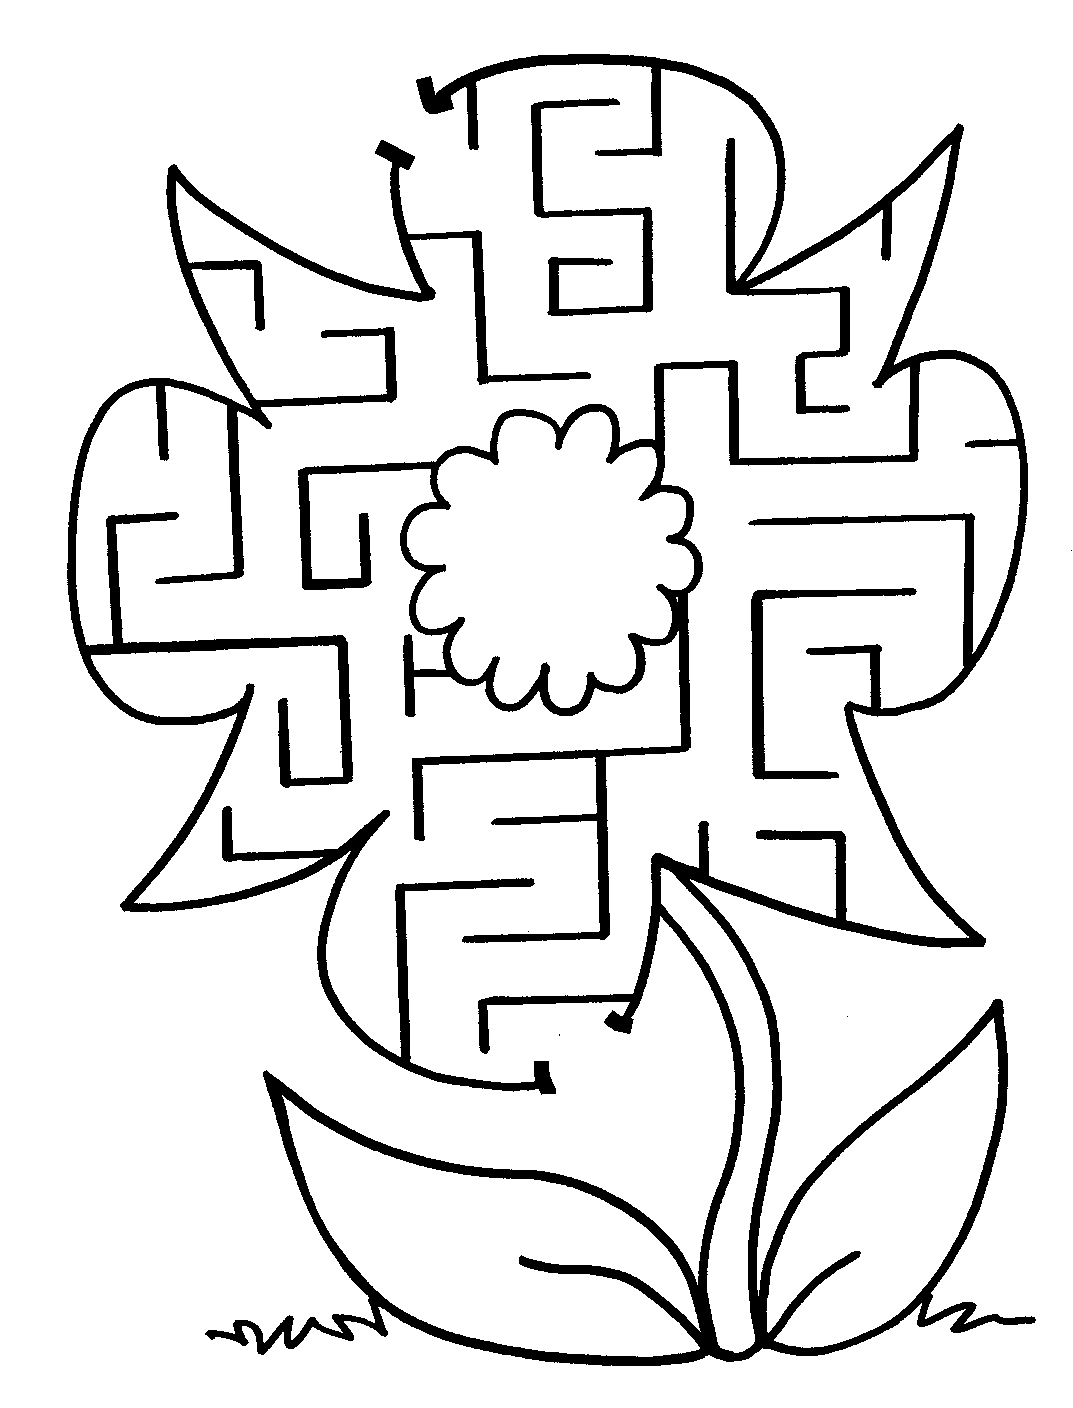 Coloring page: Labyrinths (Educational) #126476 - Printable coloring pages